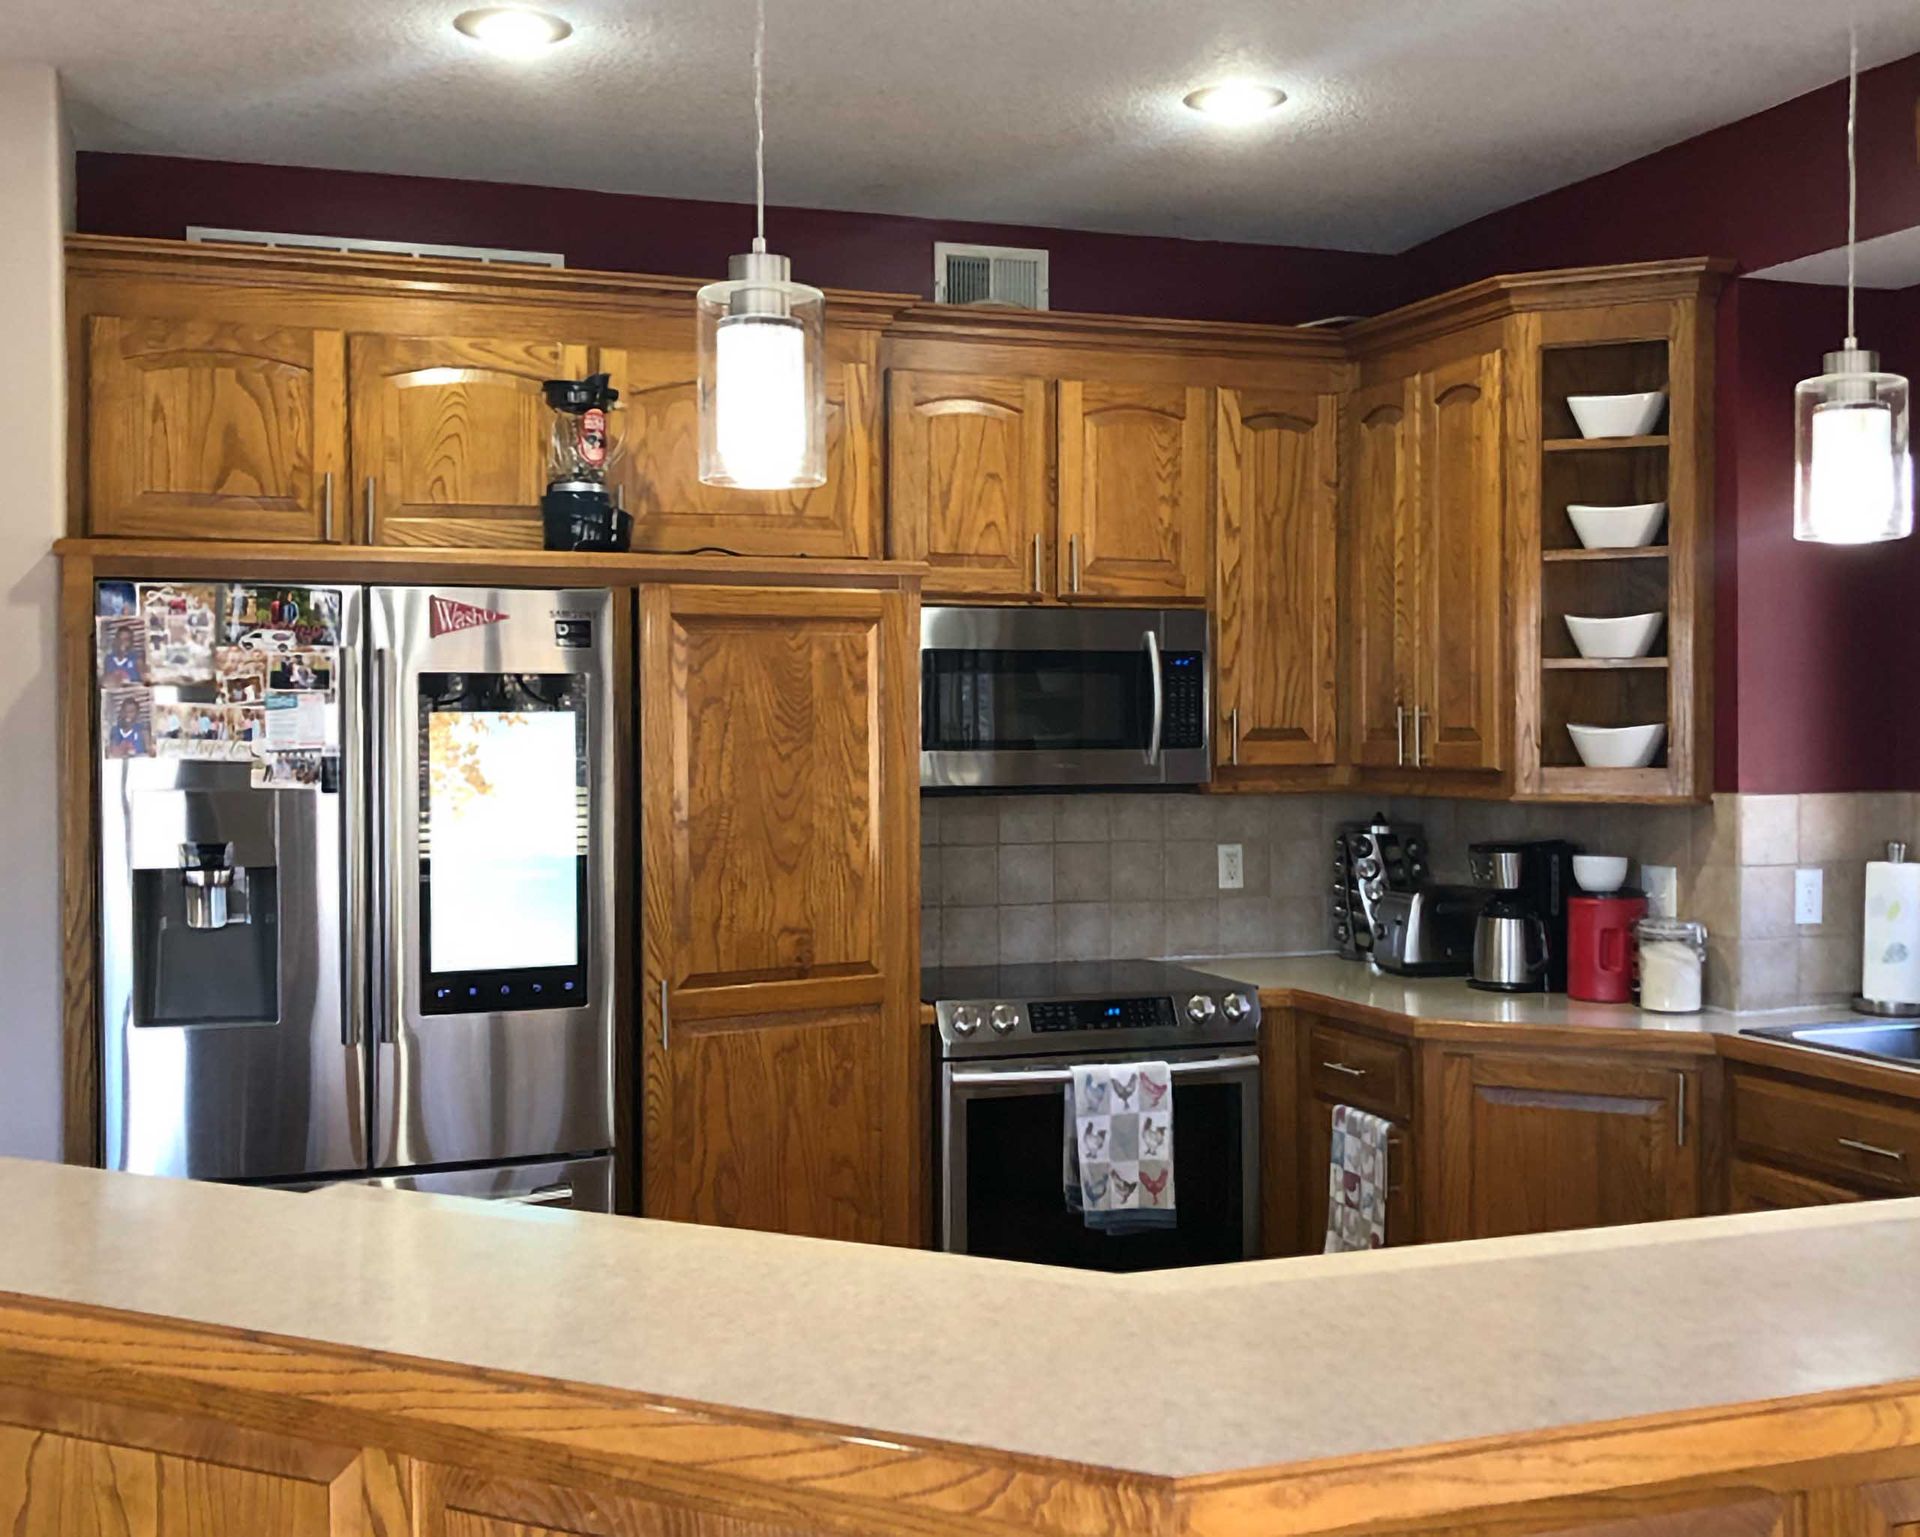 Before kitchen remodeling showing dated kitchen design with old cabinets and appliances.